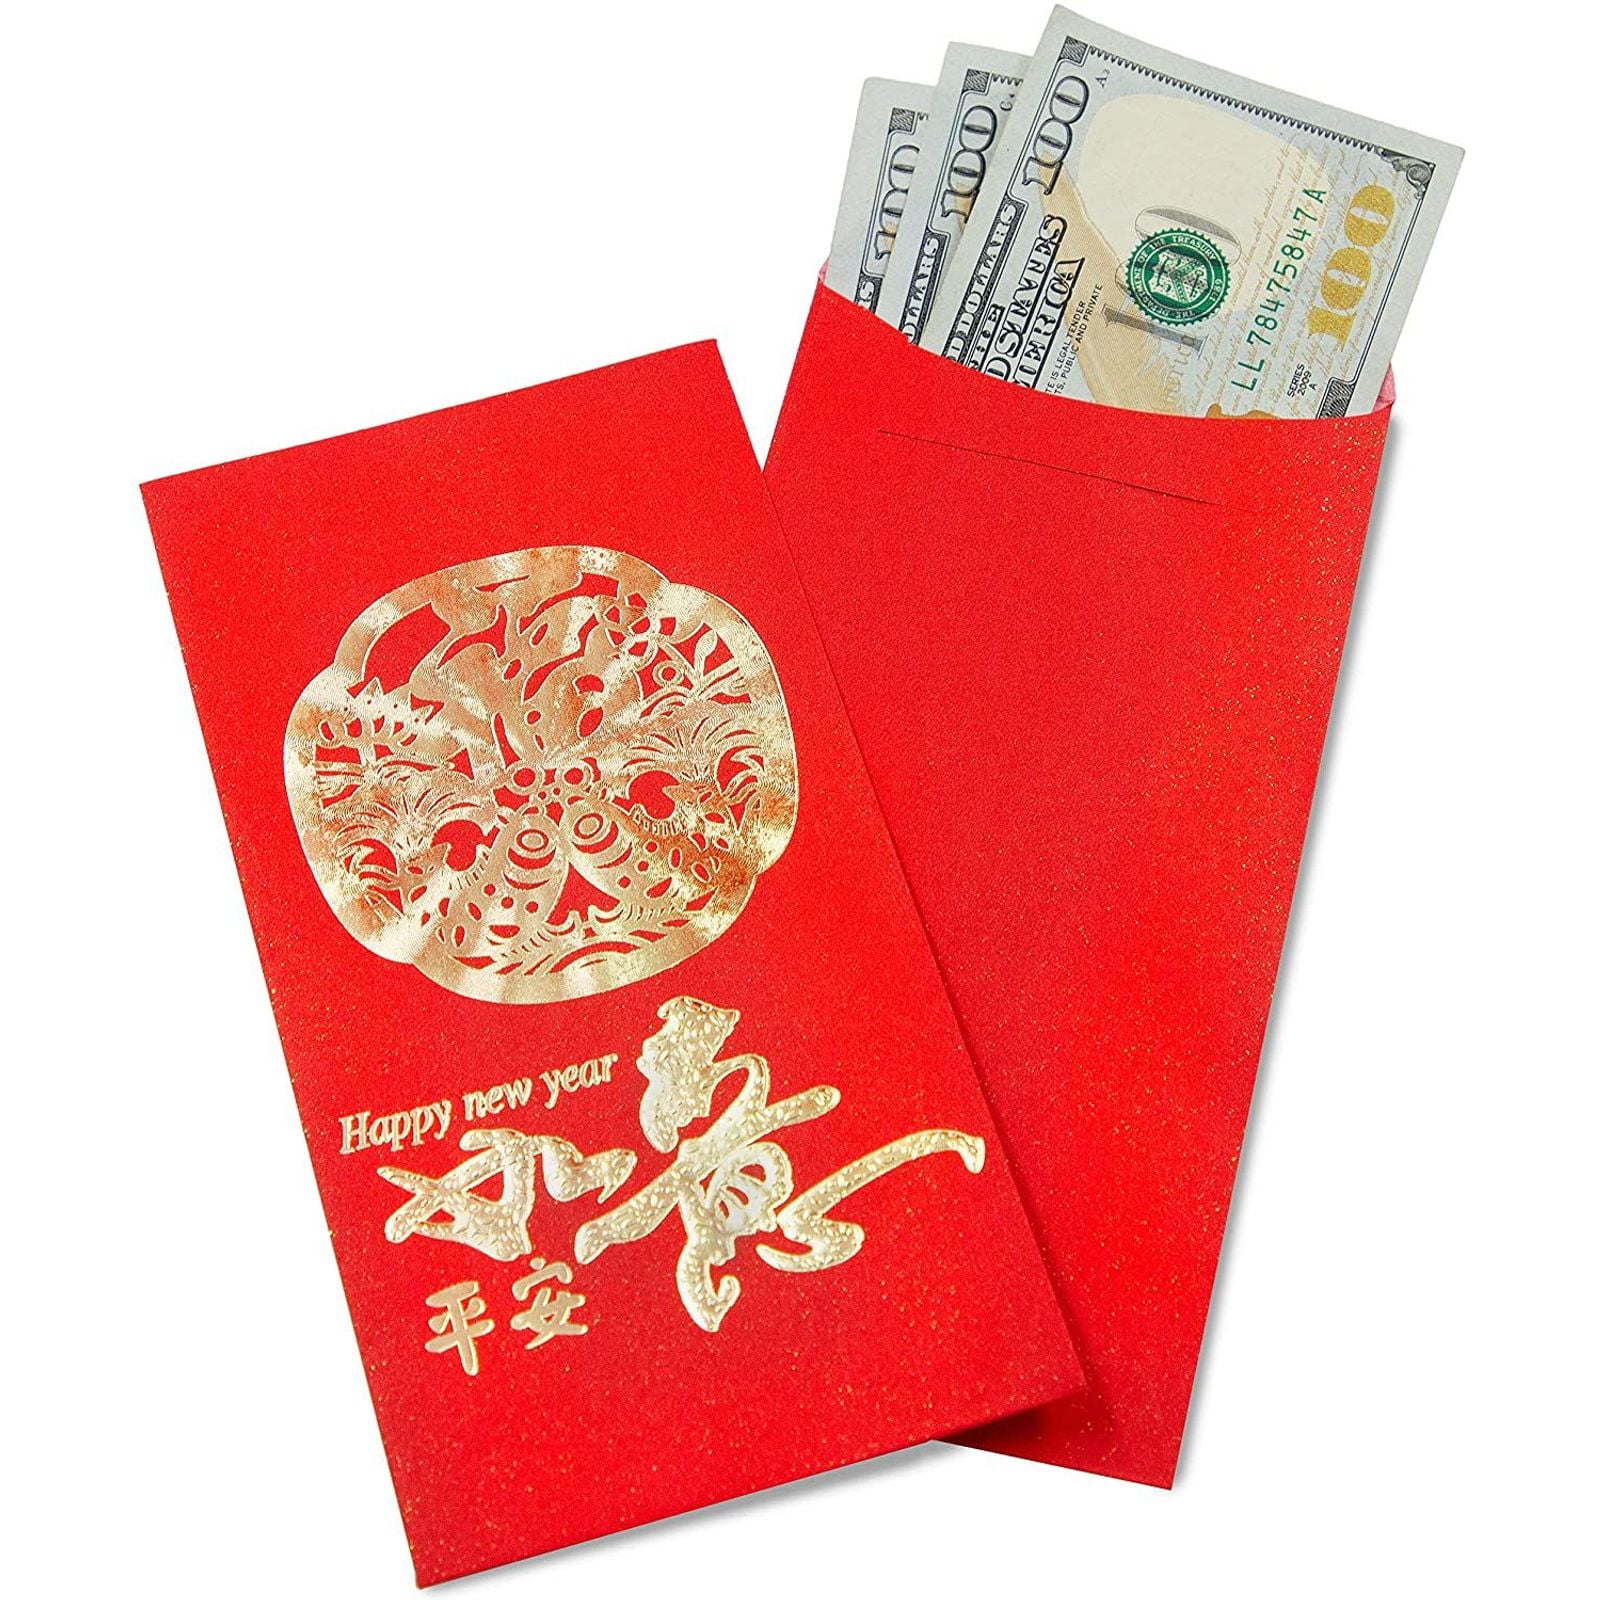 Hong Bao 12 Pcs Red Packet Money Lucky envelope Glossy paper ~ Chinese New Year 